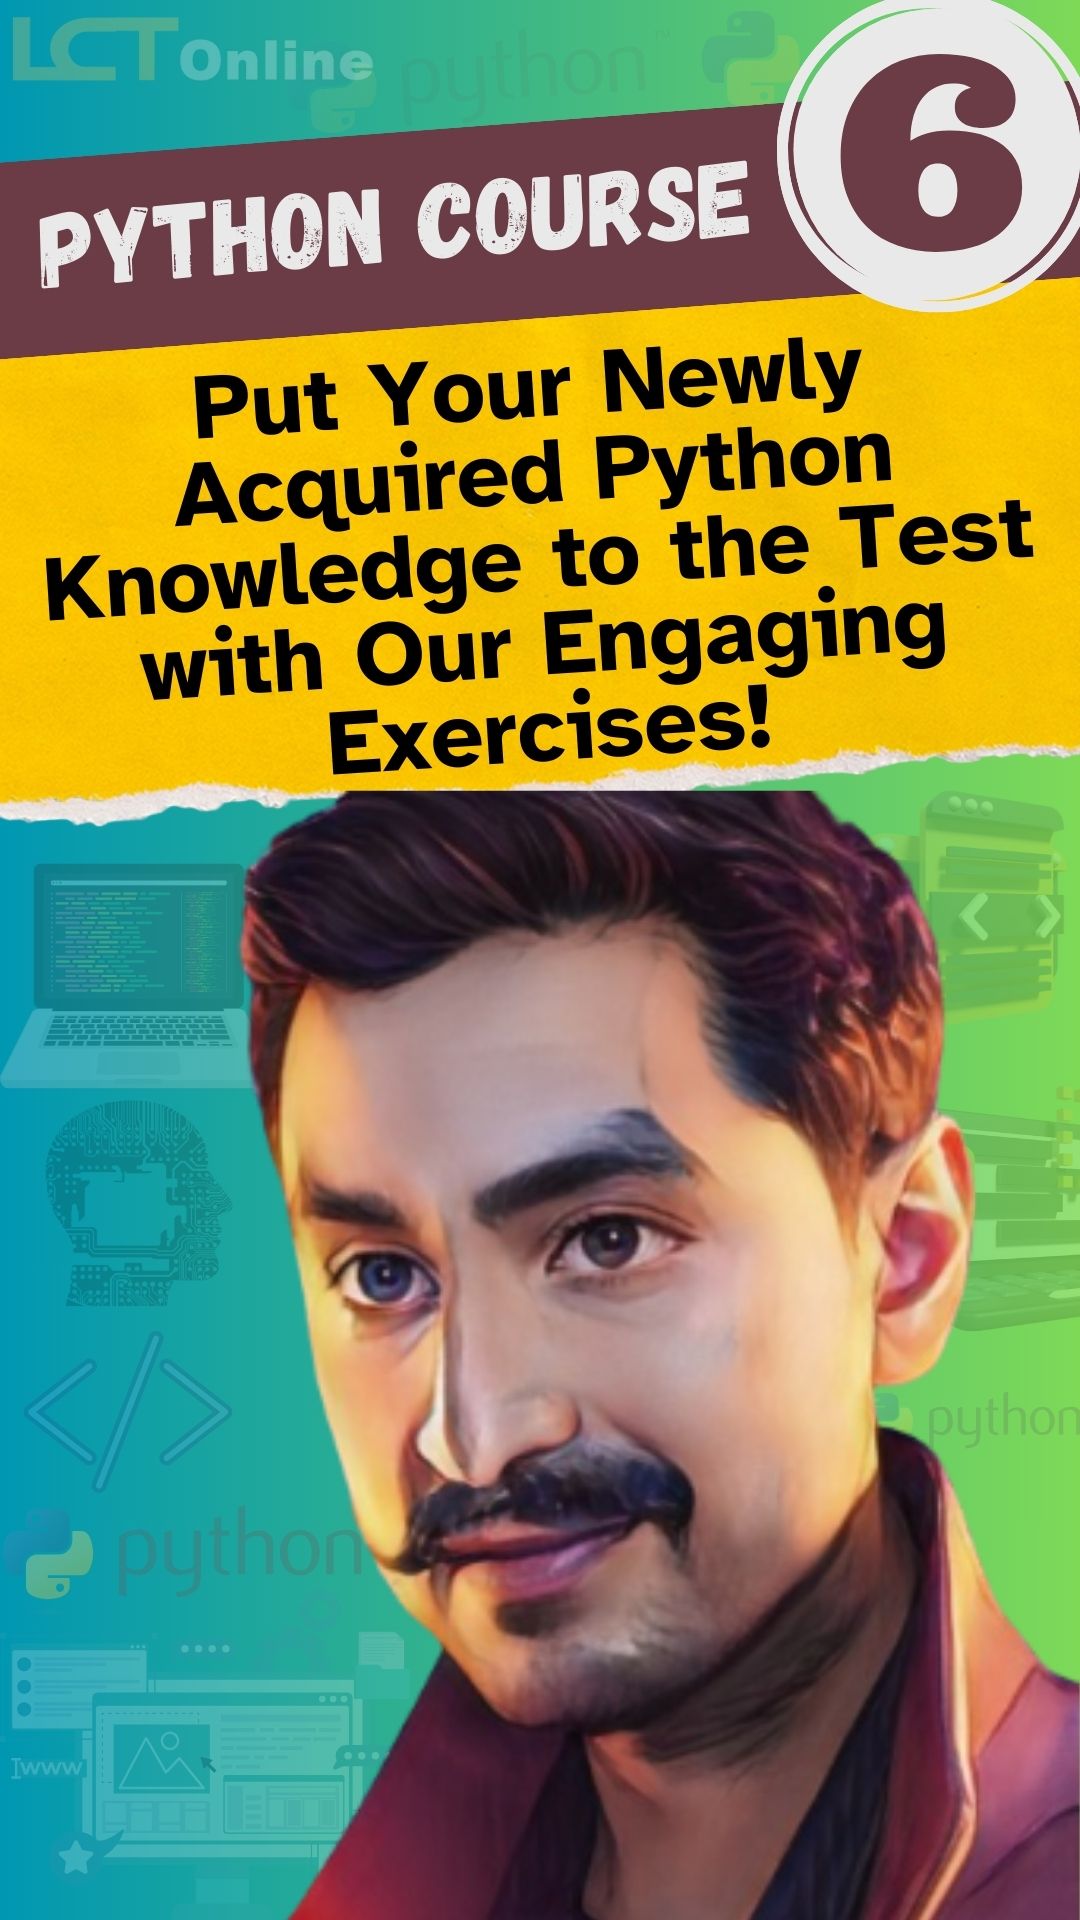 Put Your Newly Acquired Python Knowledge to the Test with Our Engaging Exercises!